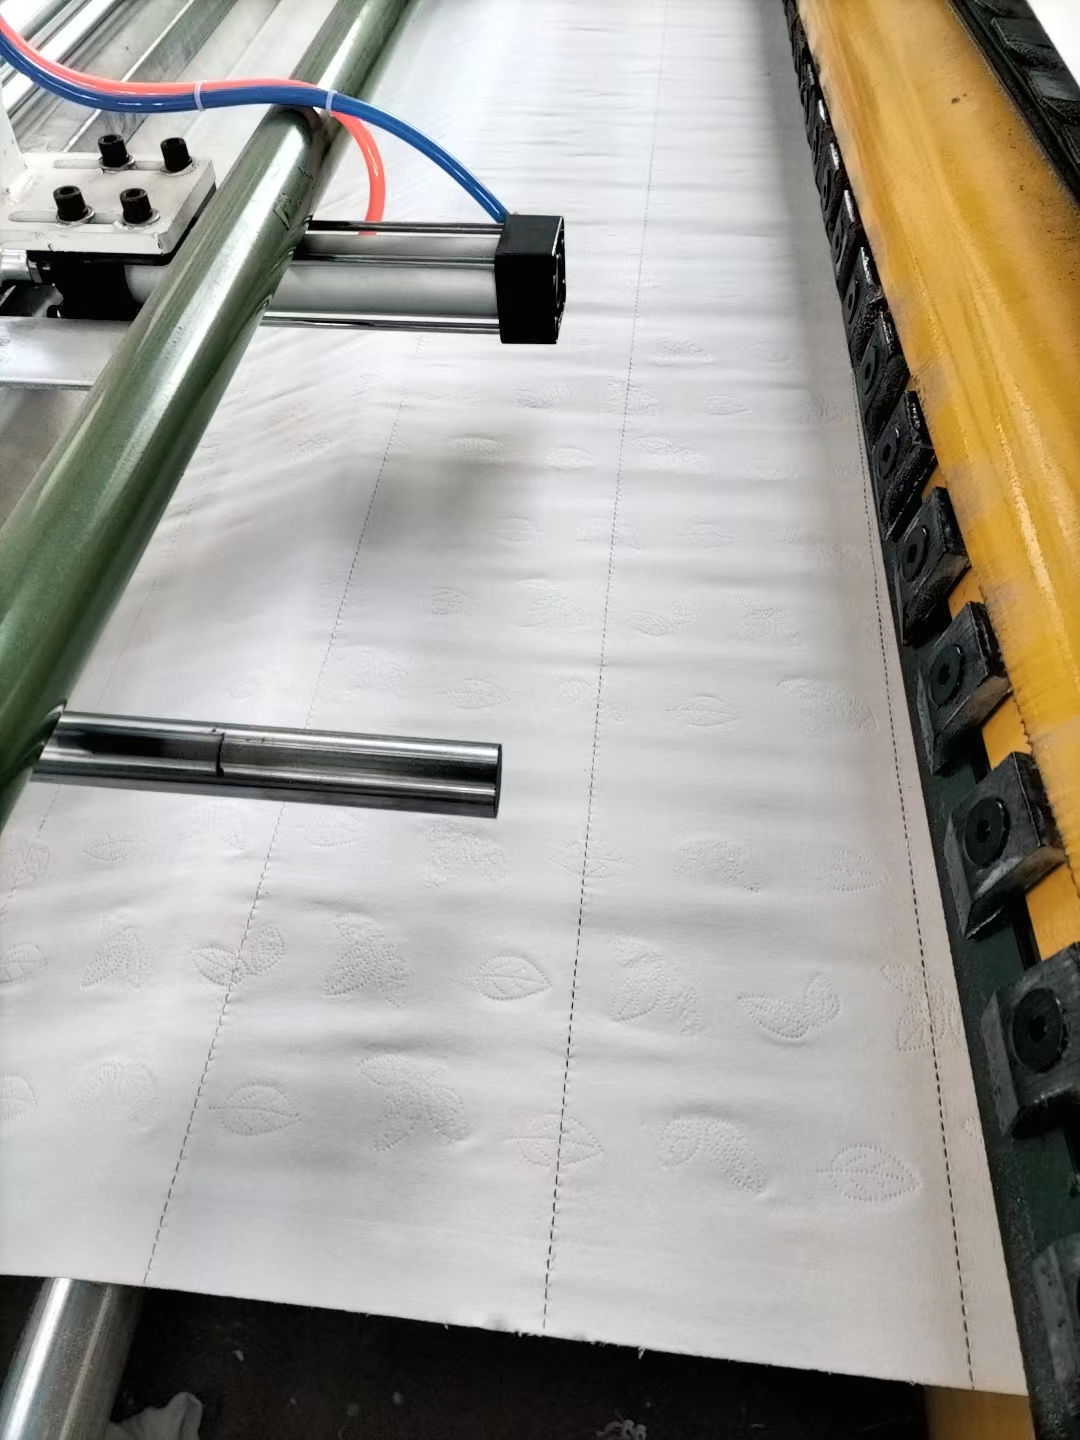 Guangmao Rewinding Machine 1880 Small Fully Automatic Paper Rolling Production Equipment Napkin Paper Extraction, Cutting, and Packaging